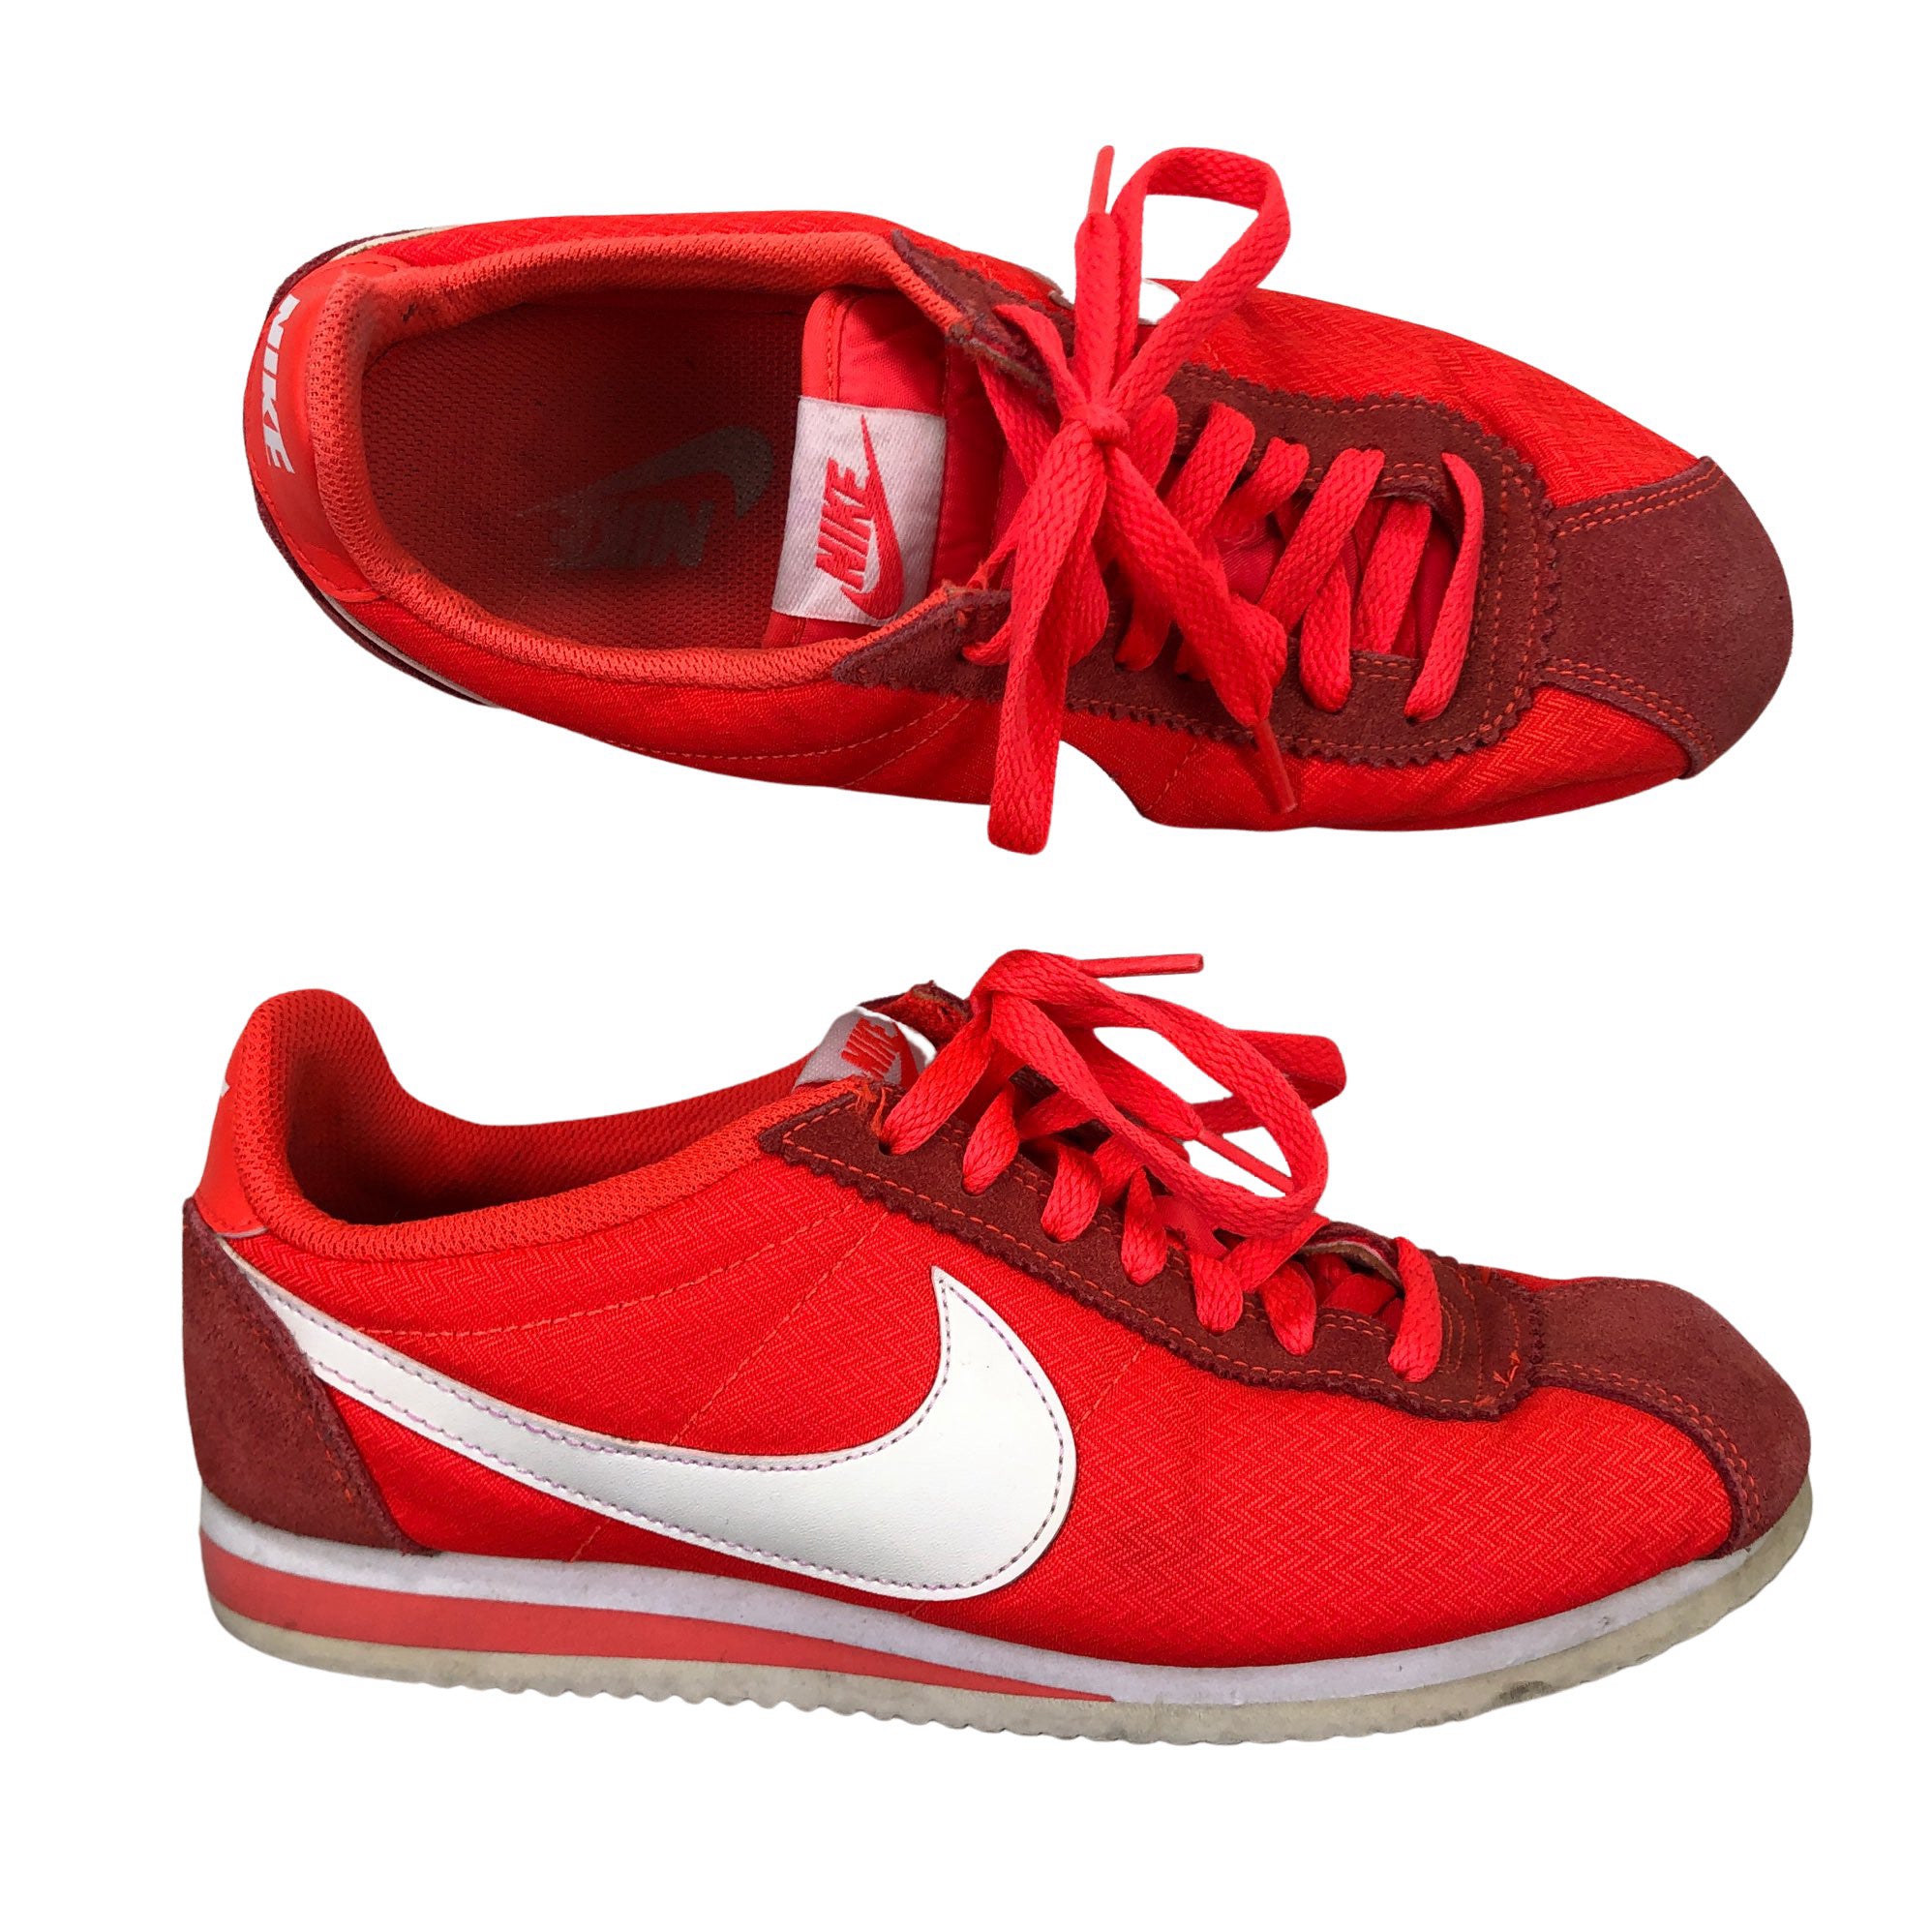 Women's Nike Casual sneakers, size 39 (Red)